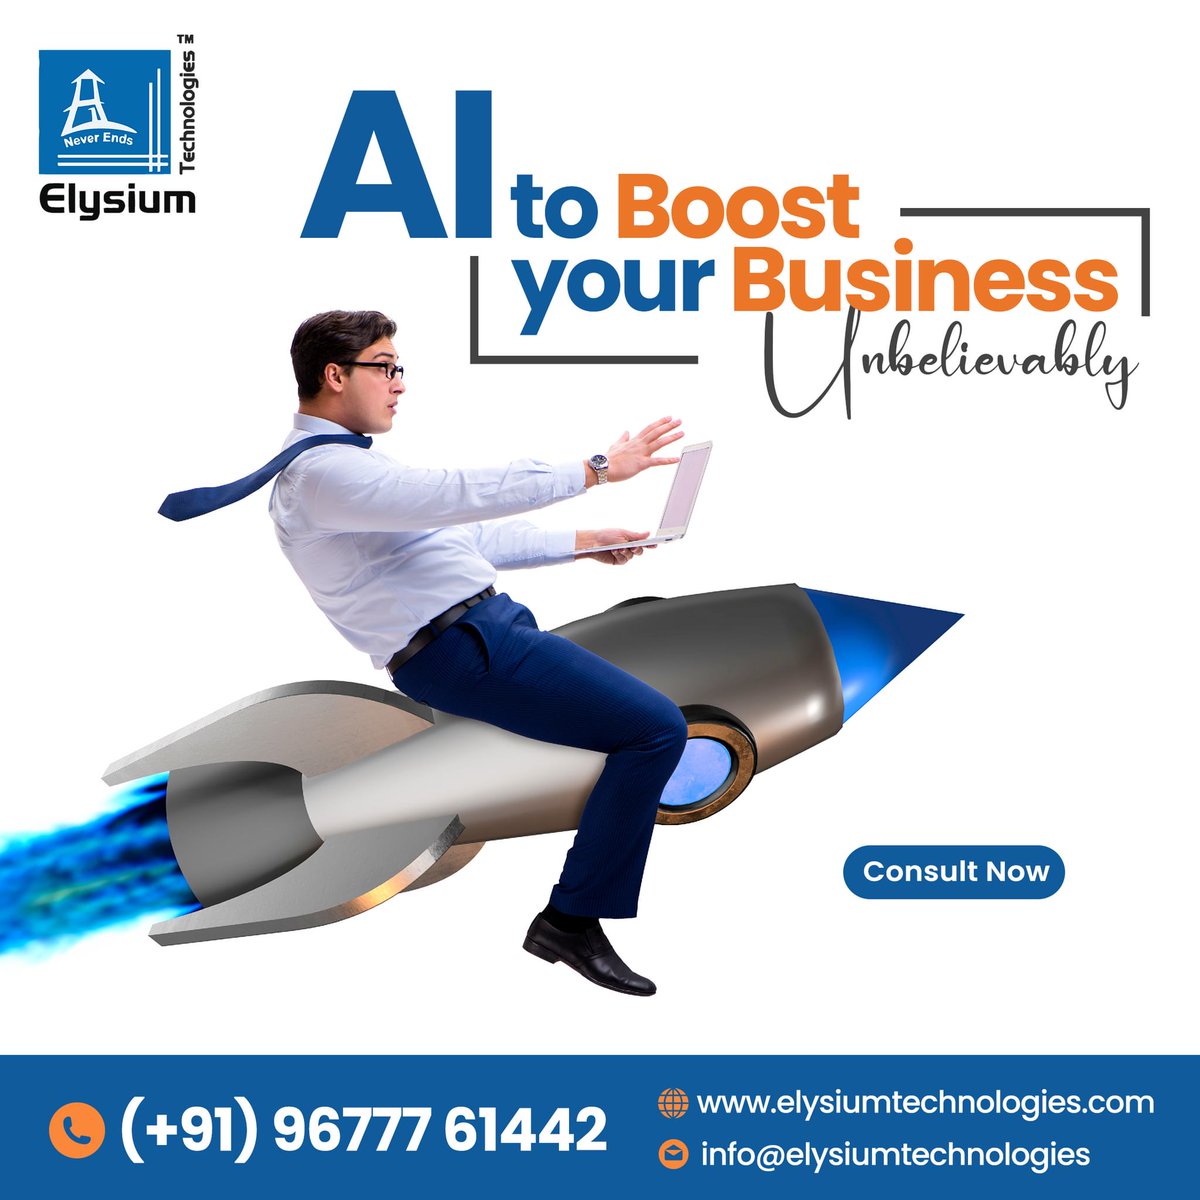 'Unlock the Power of AI to Boost Your Business with Elysium Technologies! 🚀🤖

Do refer our website rfr.bz/tl8p20p
Location-rfr.bz/tl8p20q

#elysiumtechnologies #ETPL #datascienceconsultation #ConsultingServices #datascienceagency